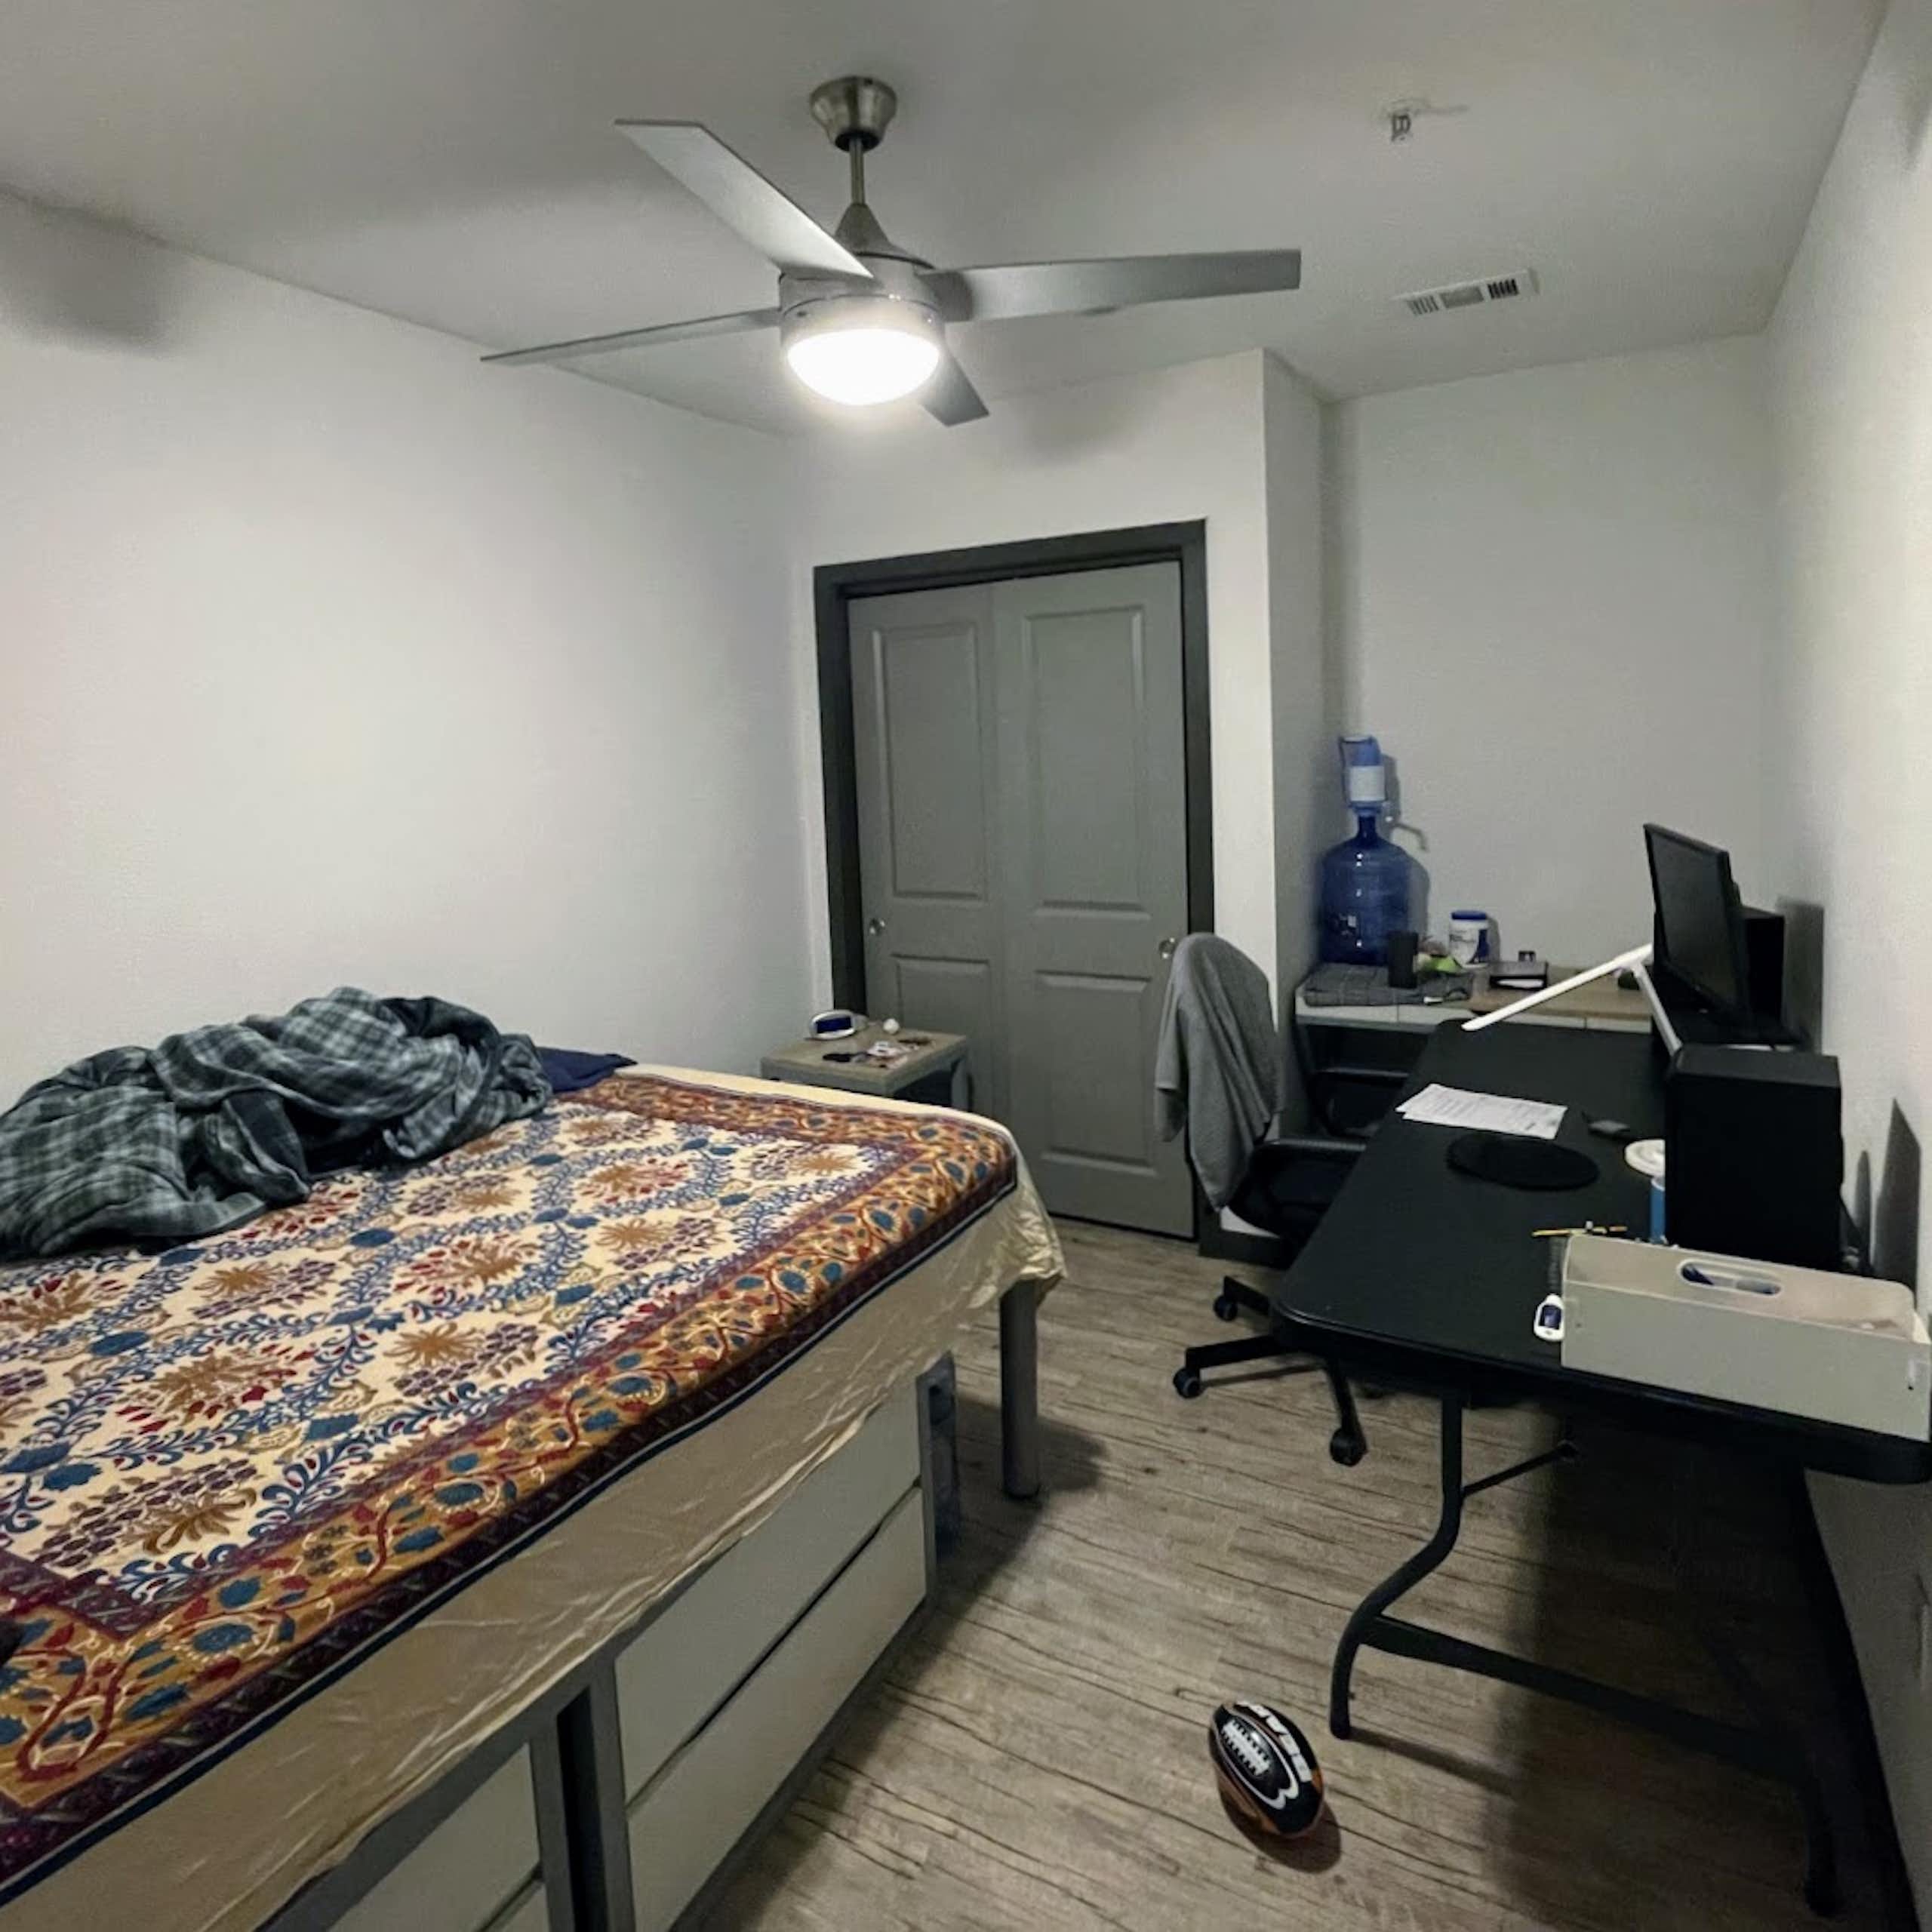 College students in Austin, Texas, have dwelled in windowless rooms for years − here’s why the city finally decided to ban them